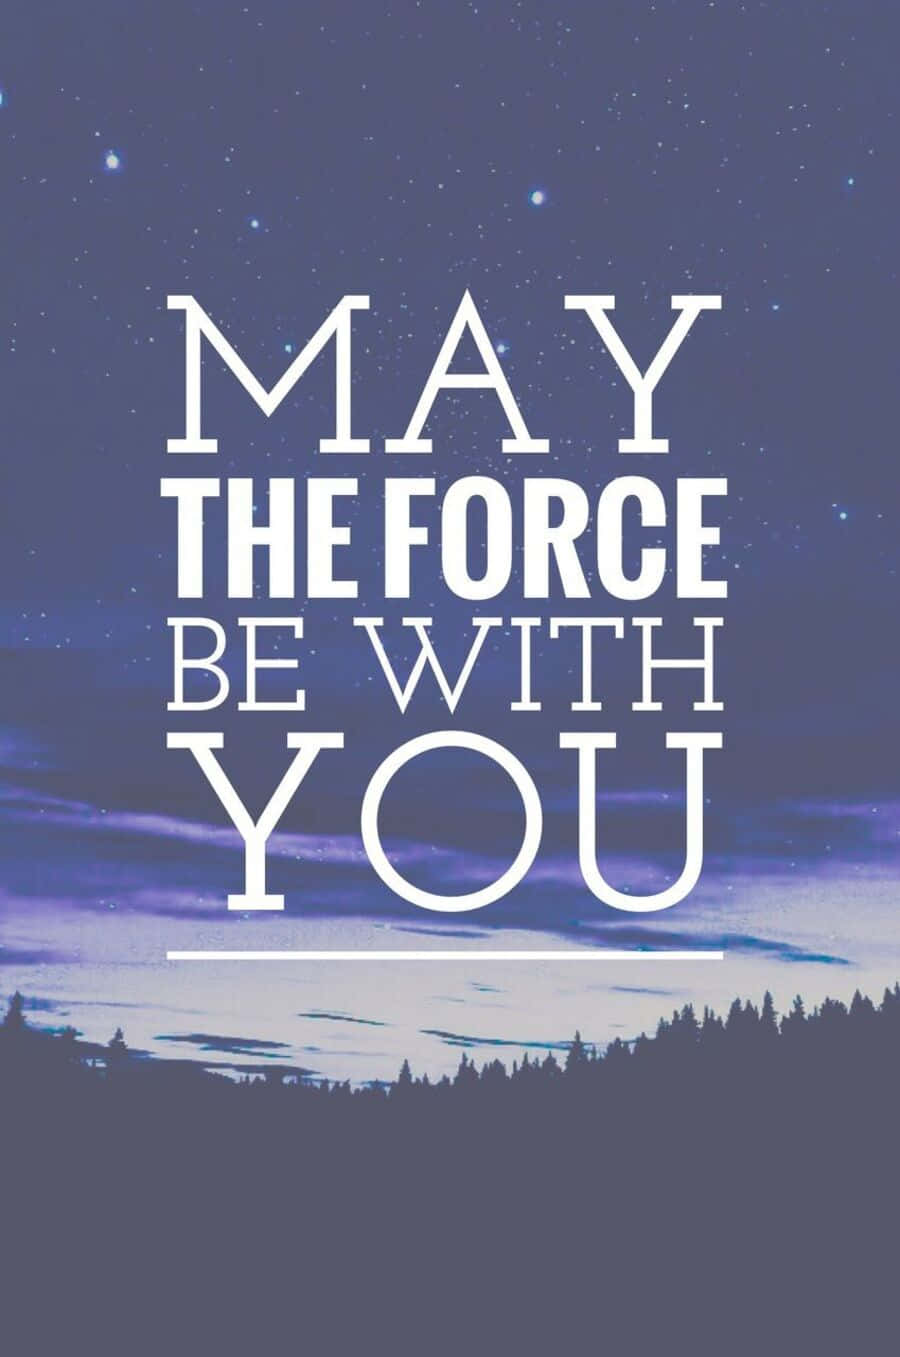 May The Force Be With You - Inspirational Star Wars Quote Wallpaper